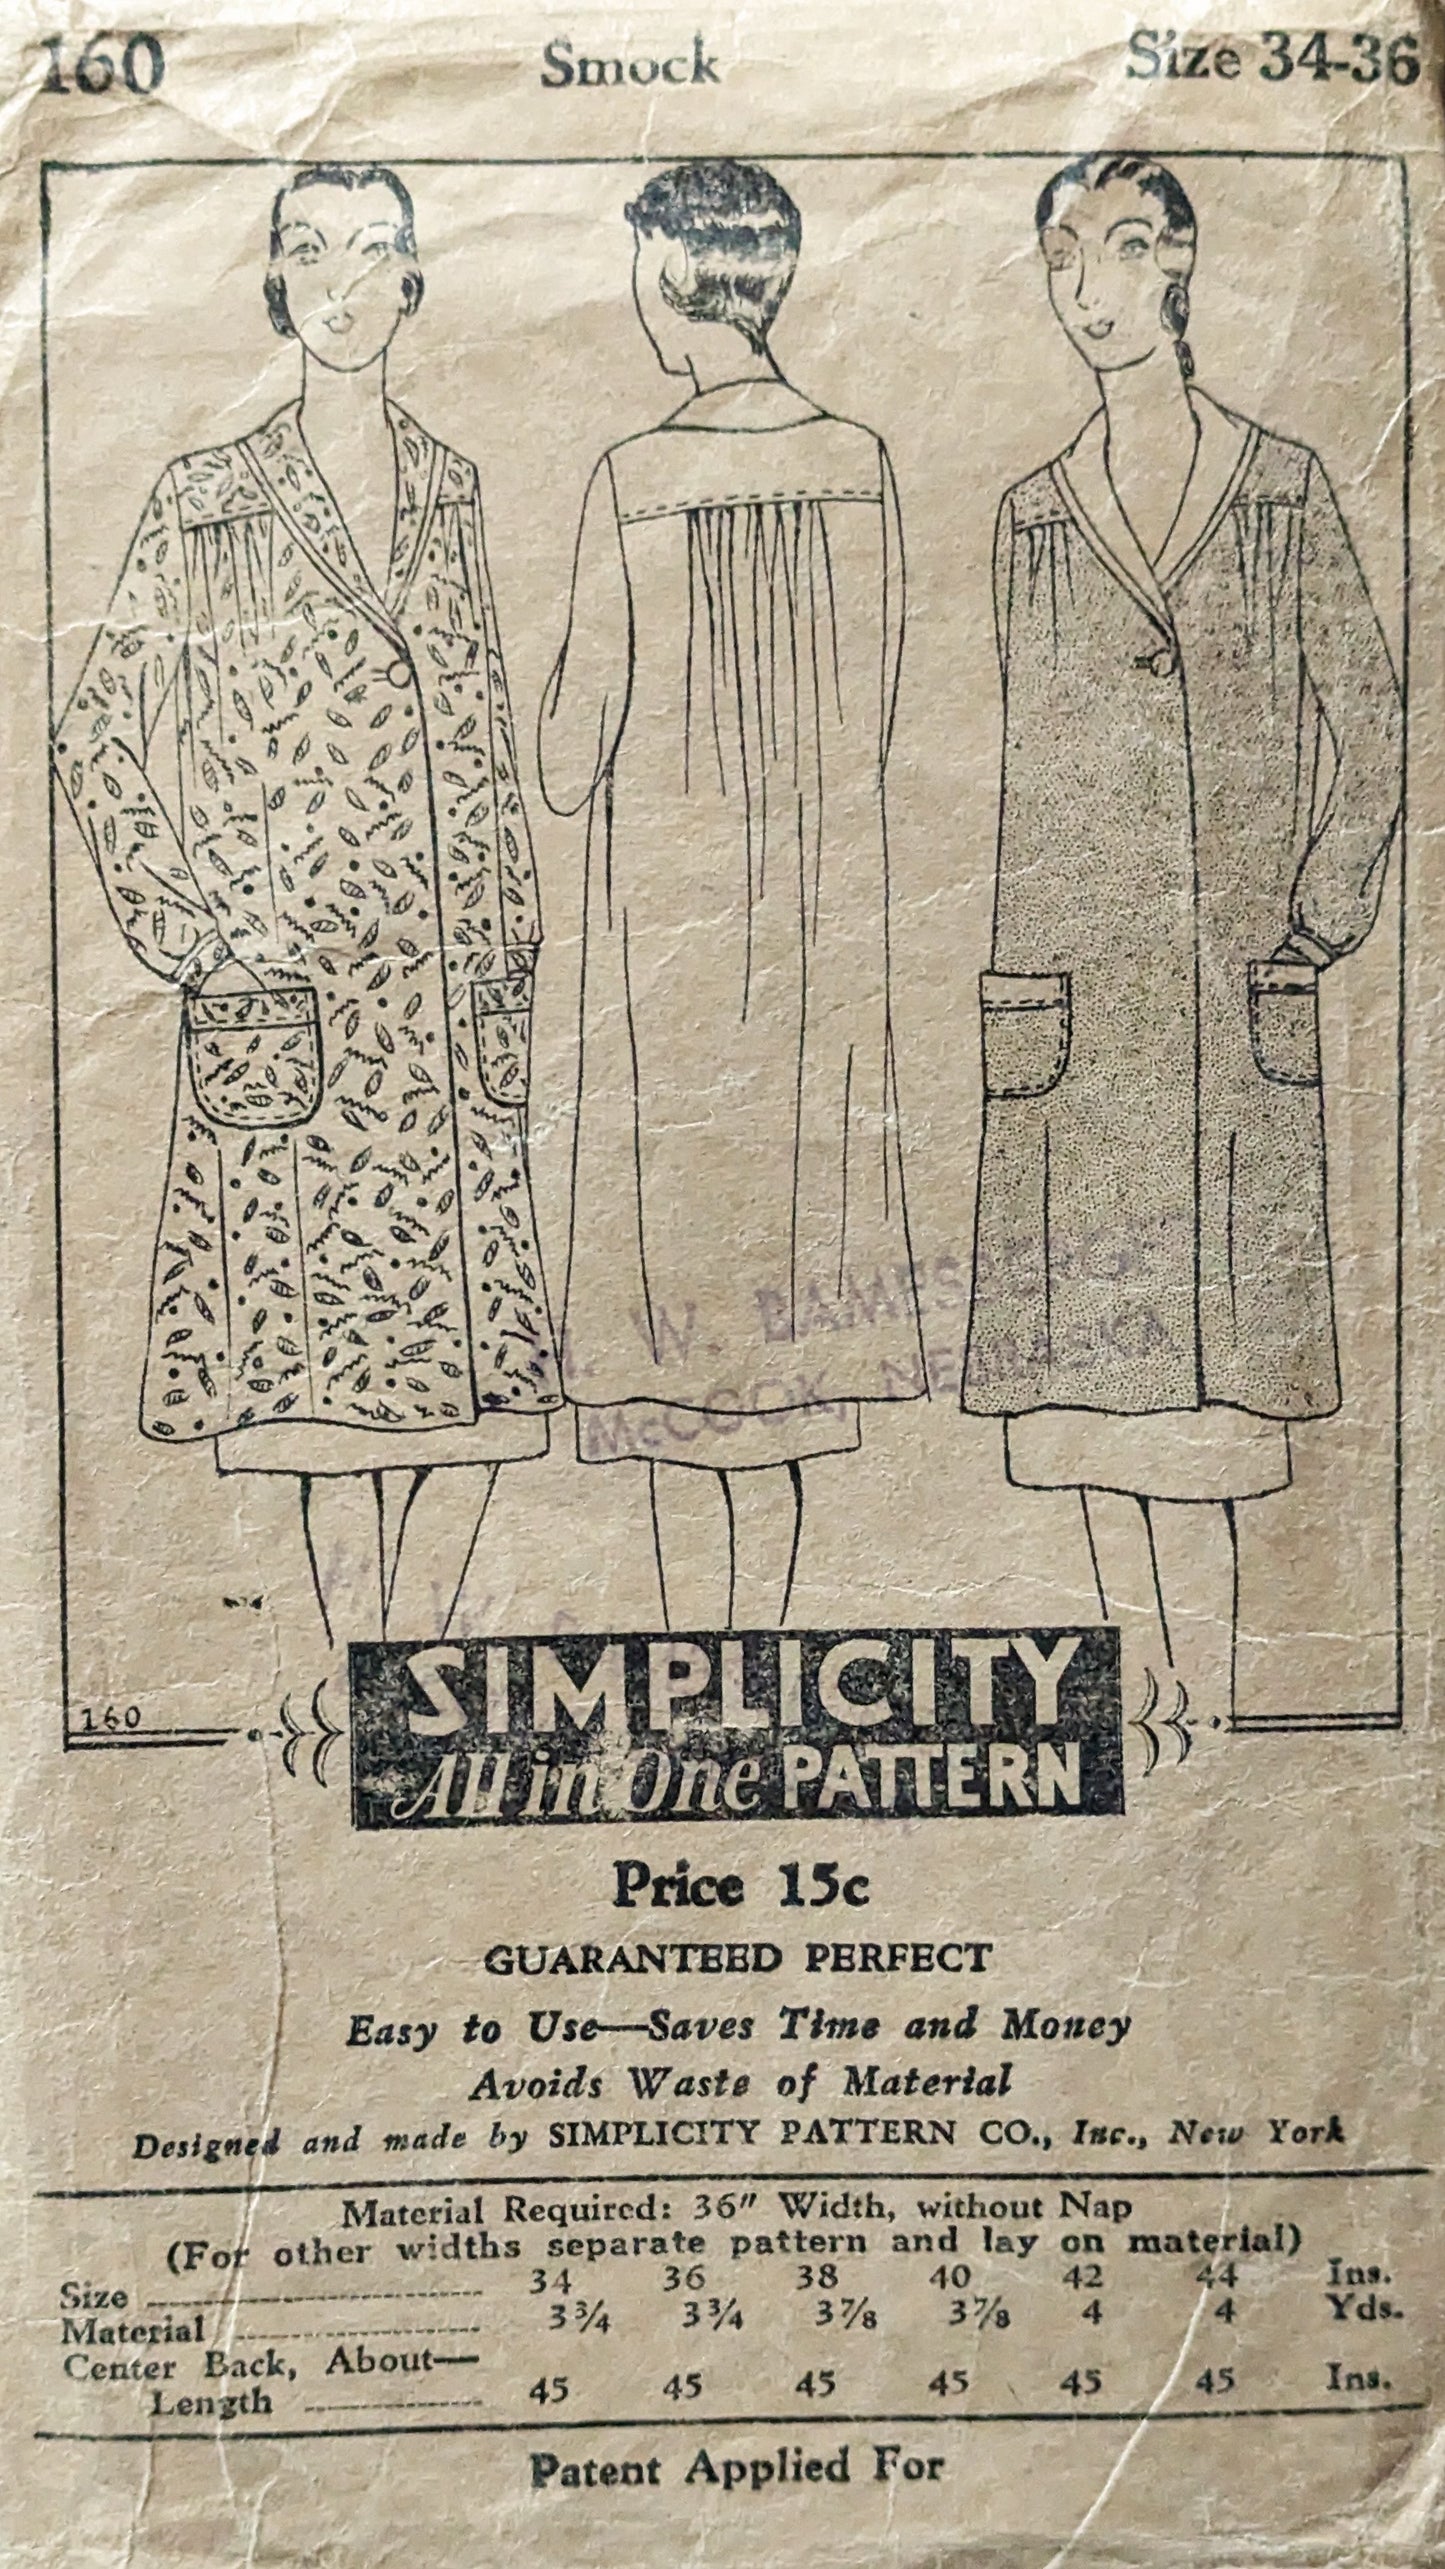 Very Rare 1930s House Coat Smock Sewing Pattern in Black and White | Antique Collectors Item Simplicity 160